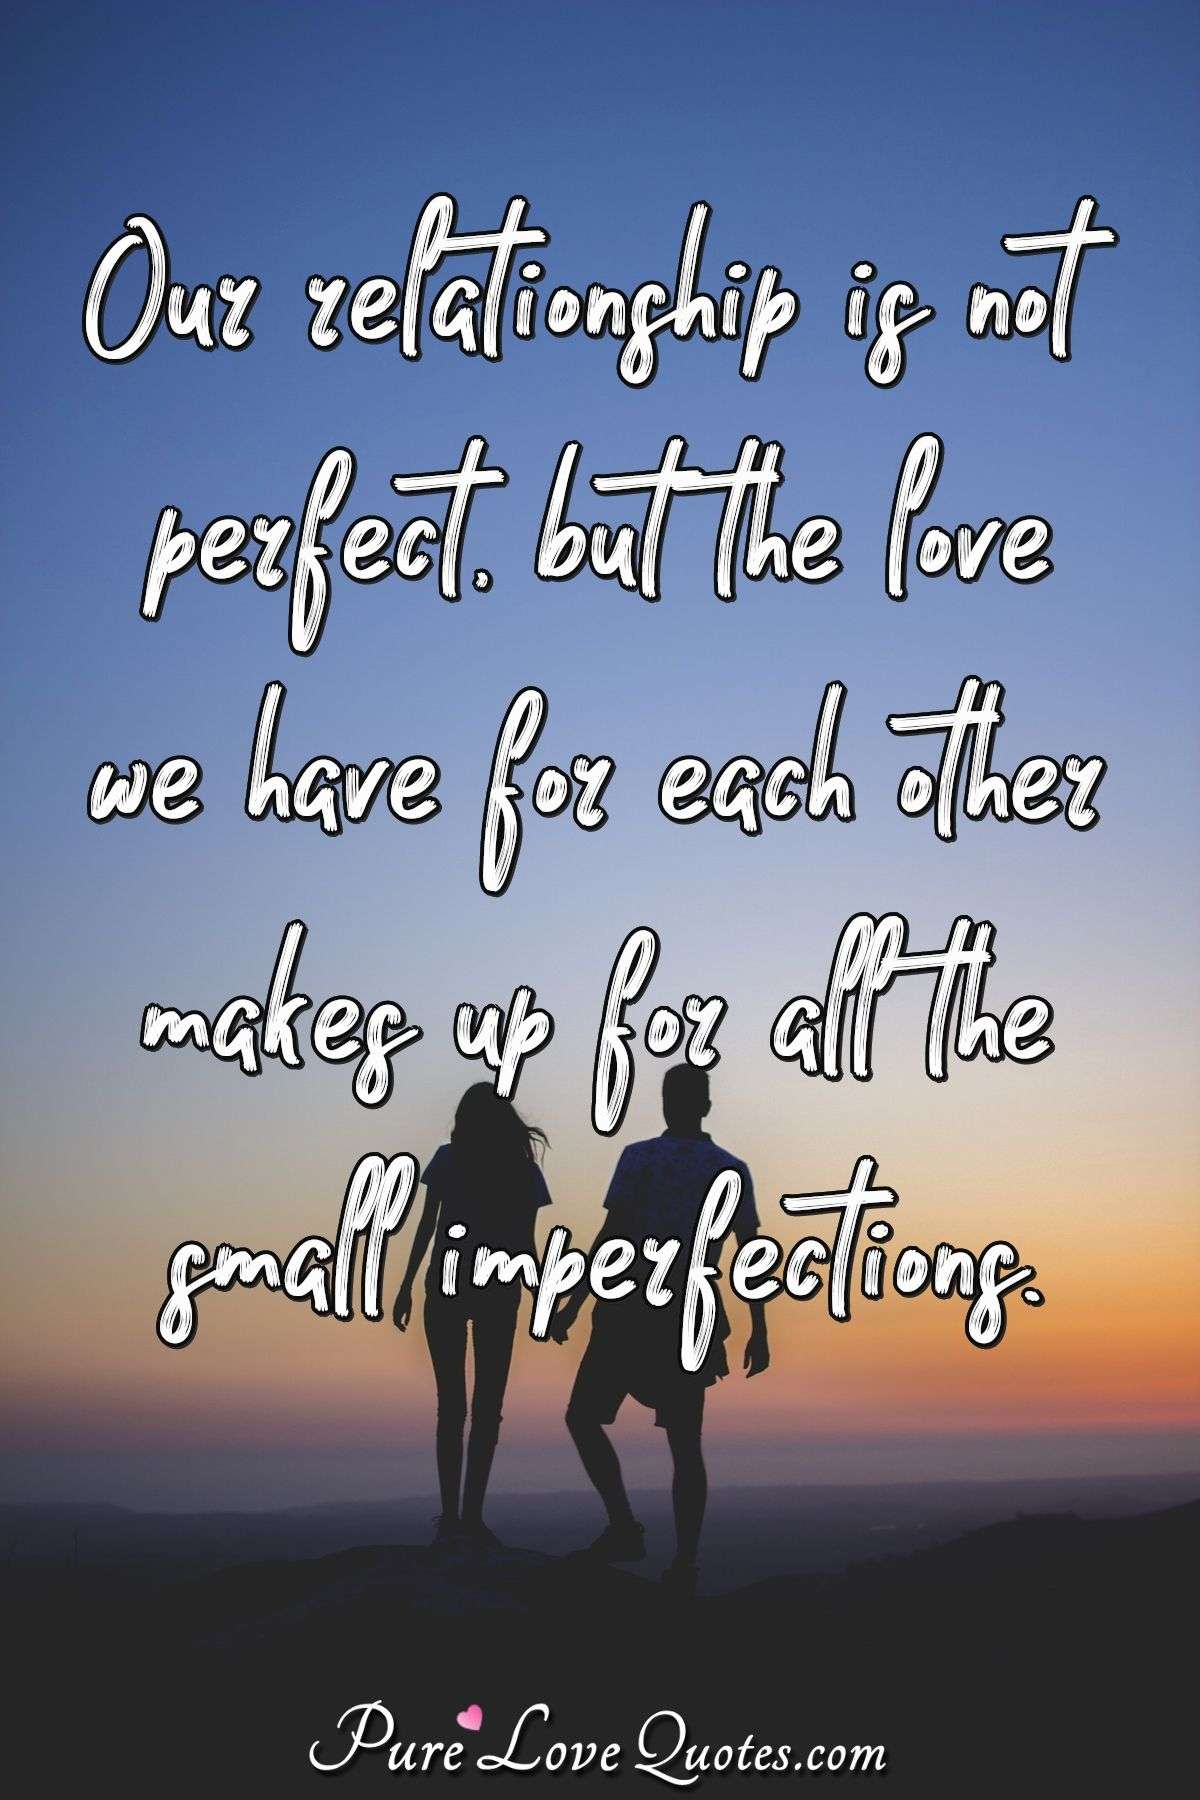 And relationship sayings quotations 24 Love